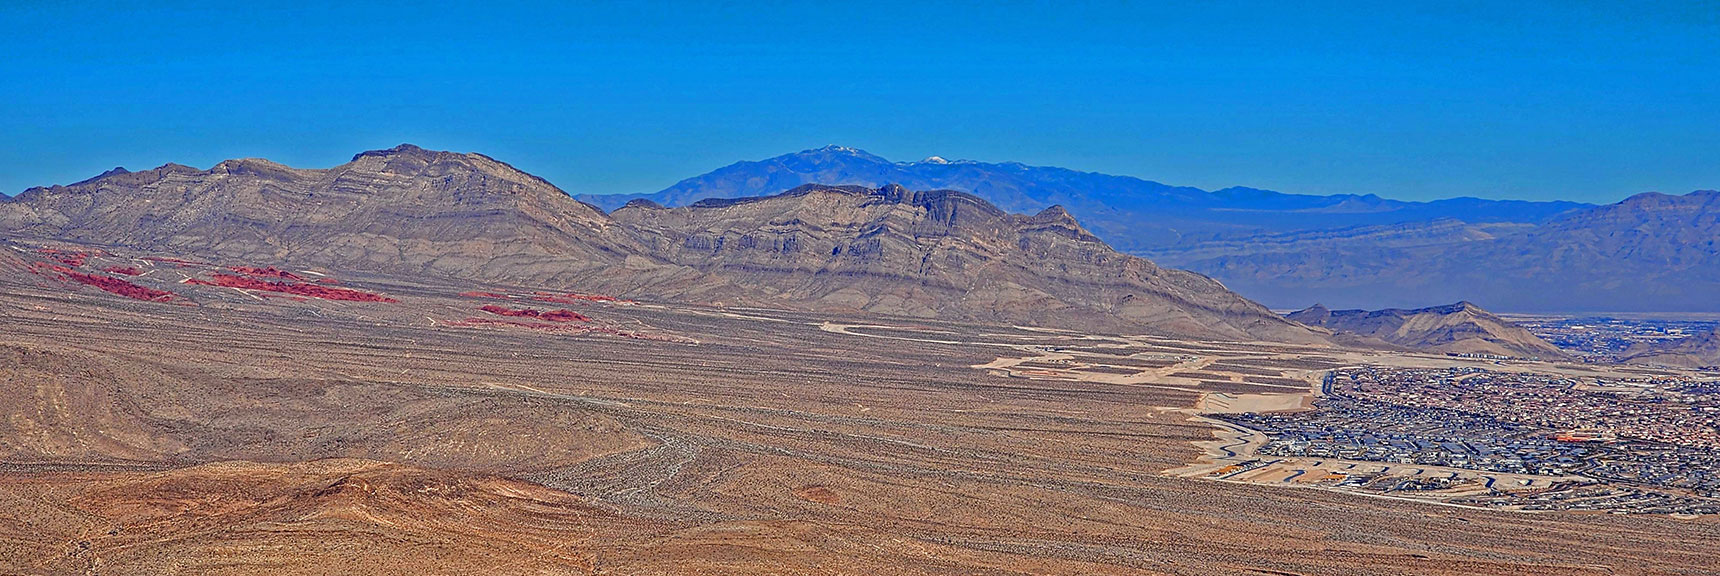 Little Red Rock (Left); Summerlin Ridge and Urban Expansion (Center); Sheep Range (Background) | Eastern Outer Circuit | Blue Diamond Hill | Red Rock Canyon, Nevada